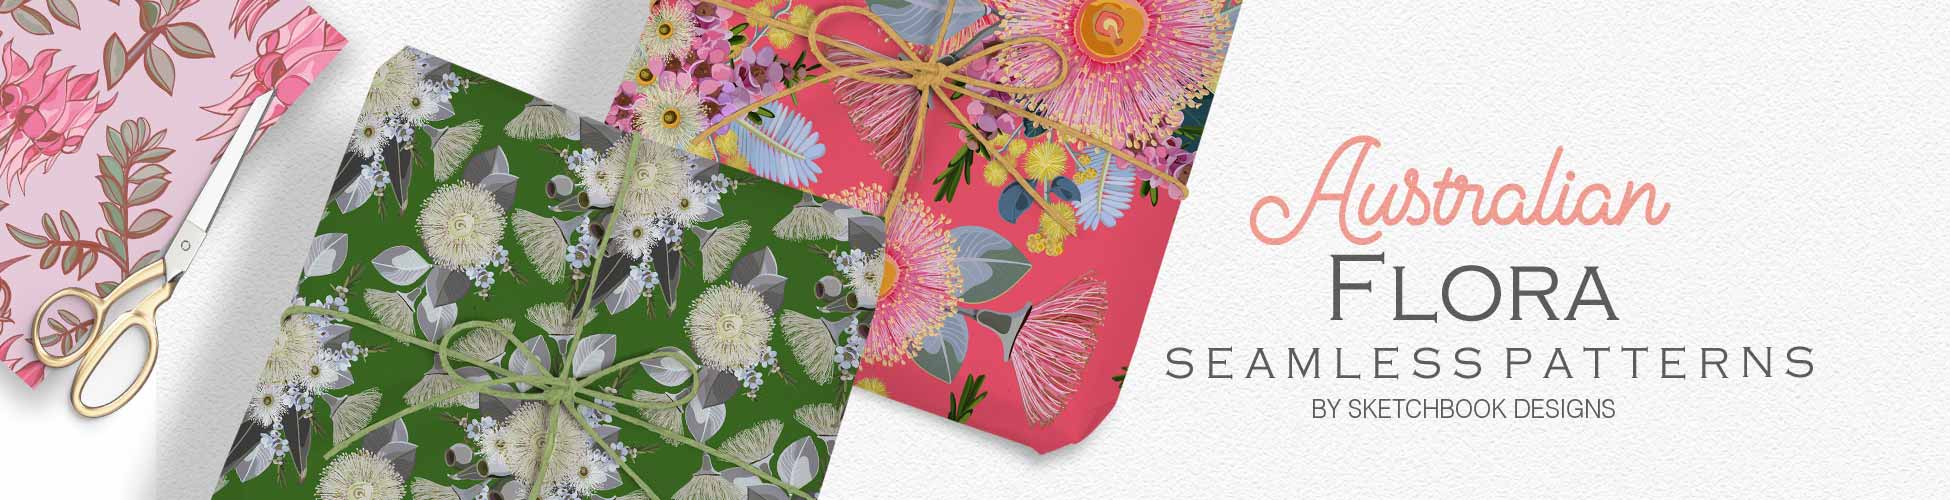 Australian flora and botanical seamless patterns by Sketchbook Designs